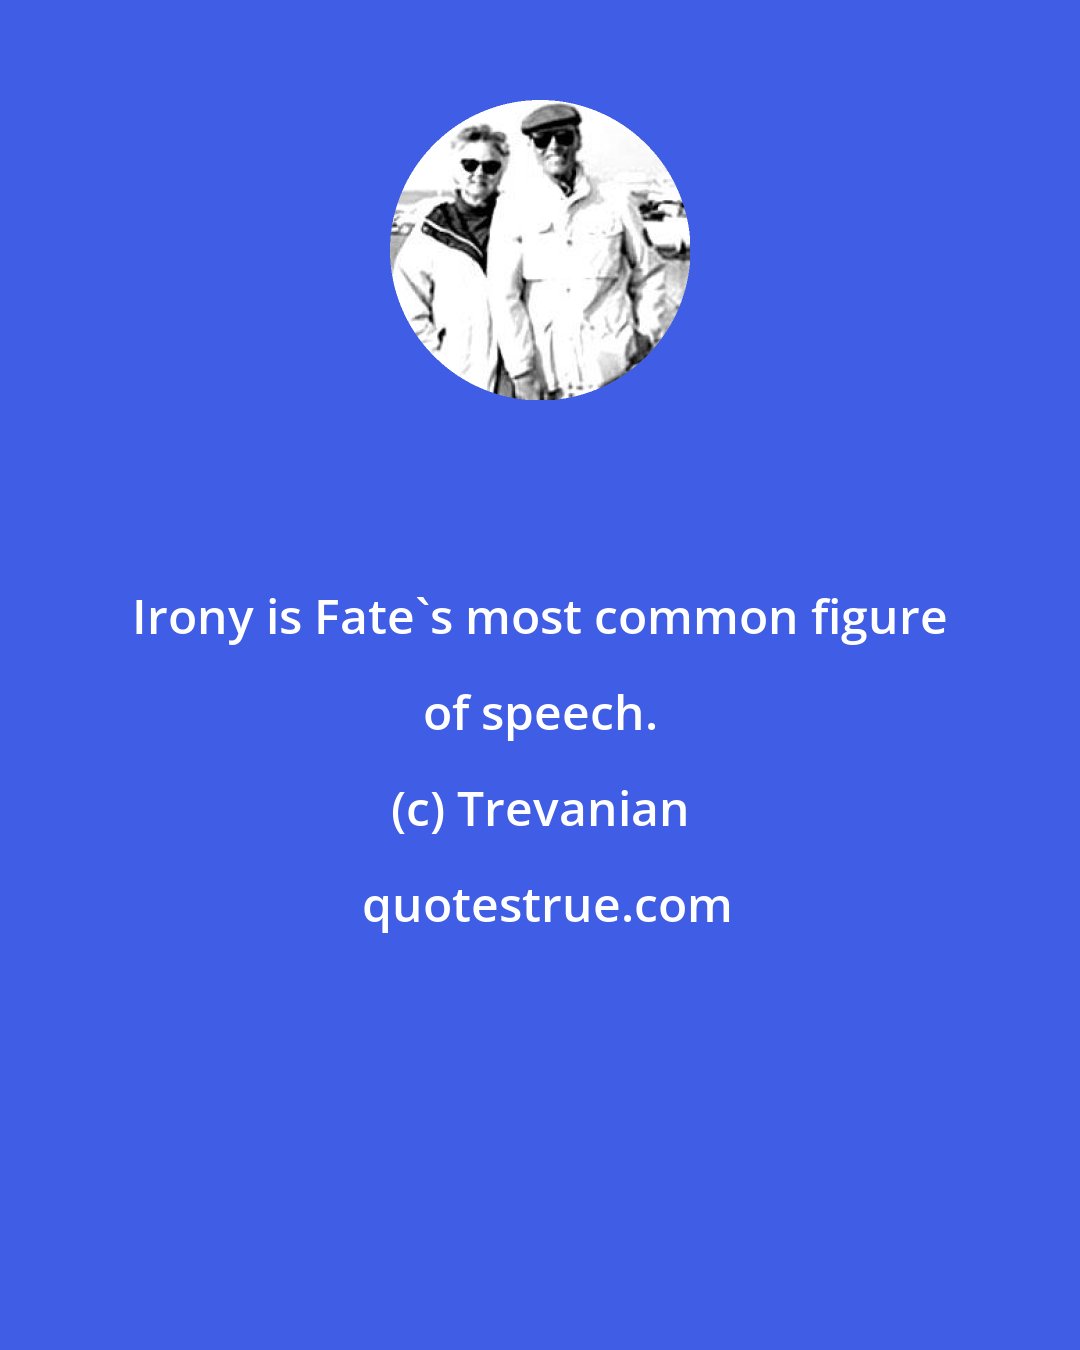 Trevanian: Irony is Fate's most common figure of speech.